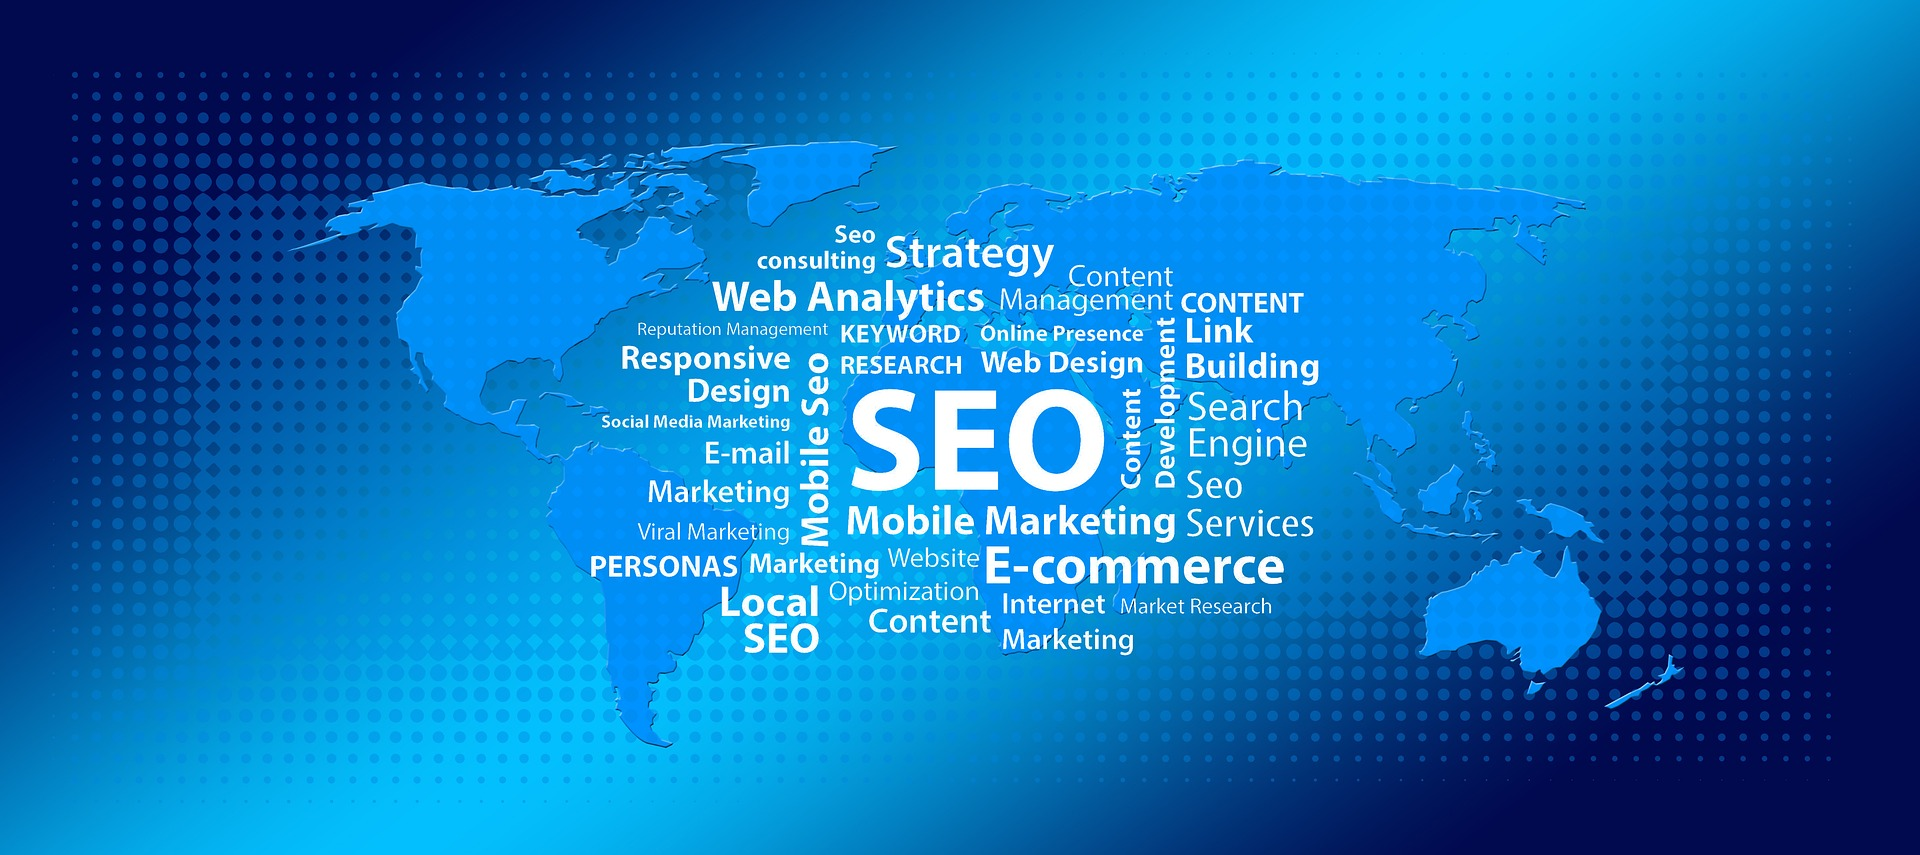 The importance of SEO for law firm marketing can not be underestimated in today's digital era. 